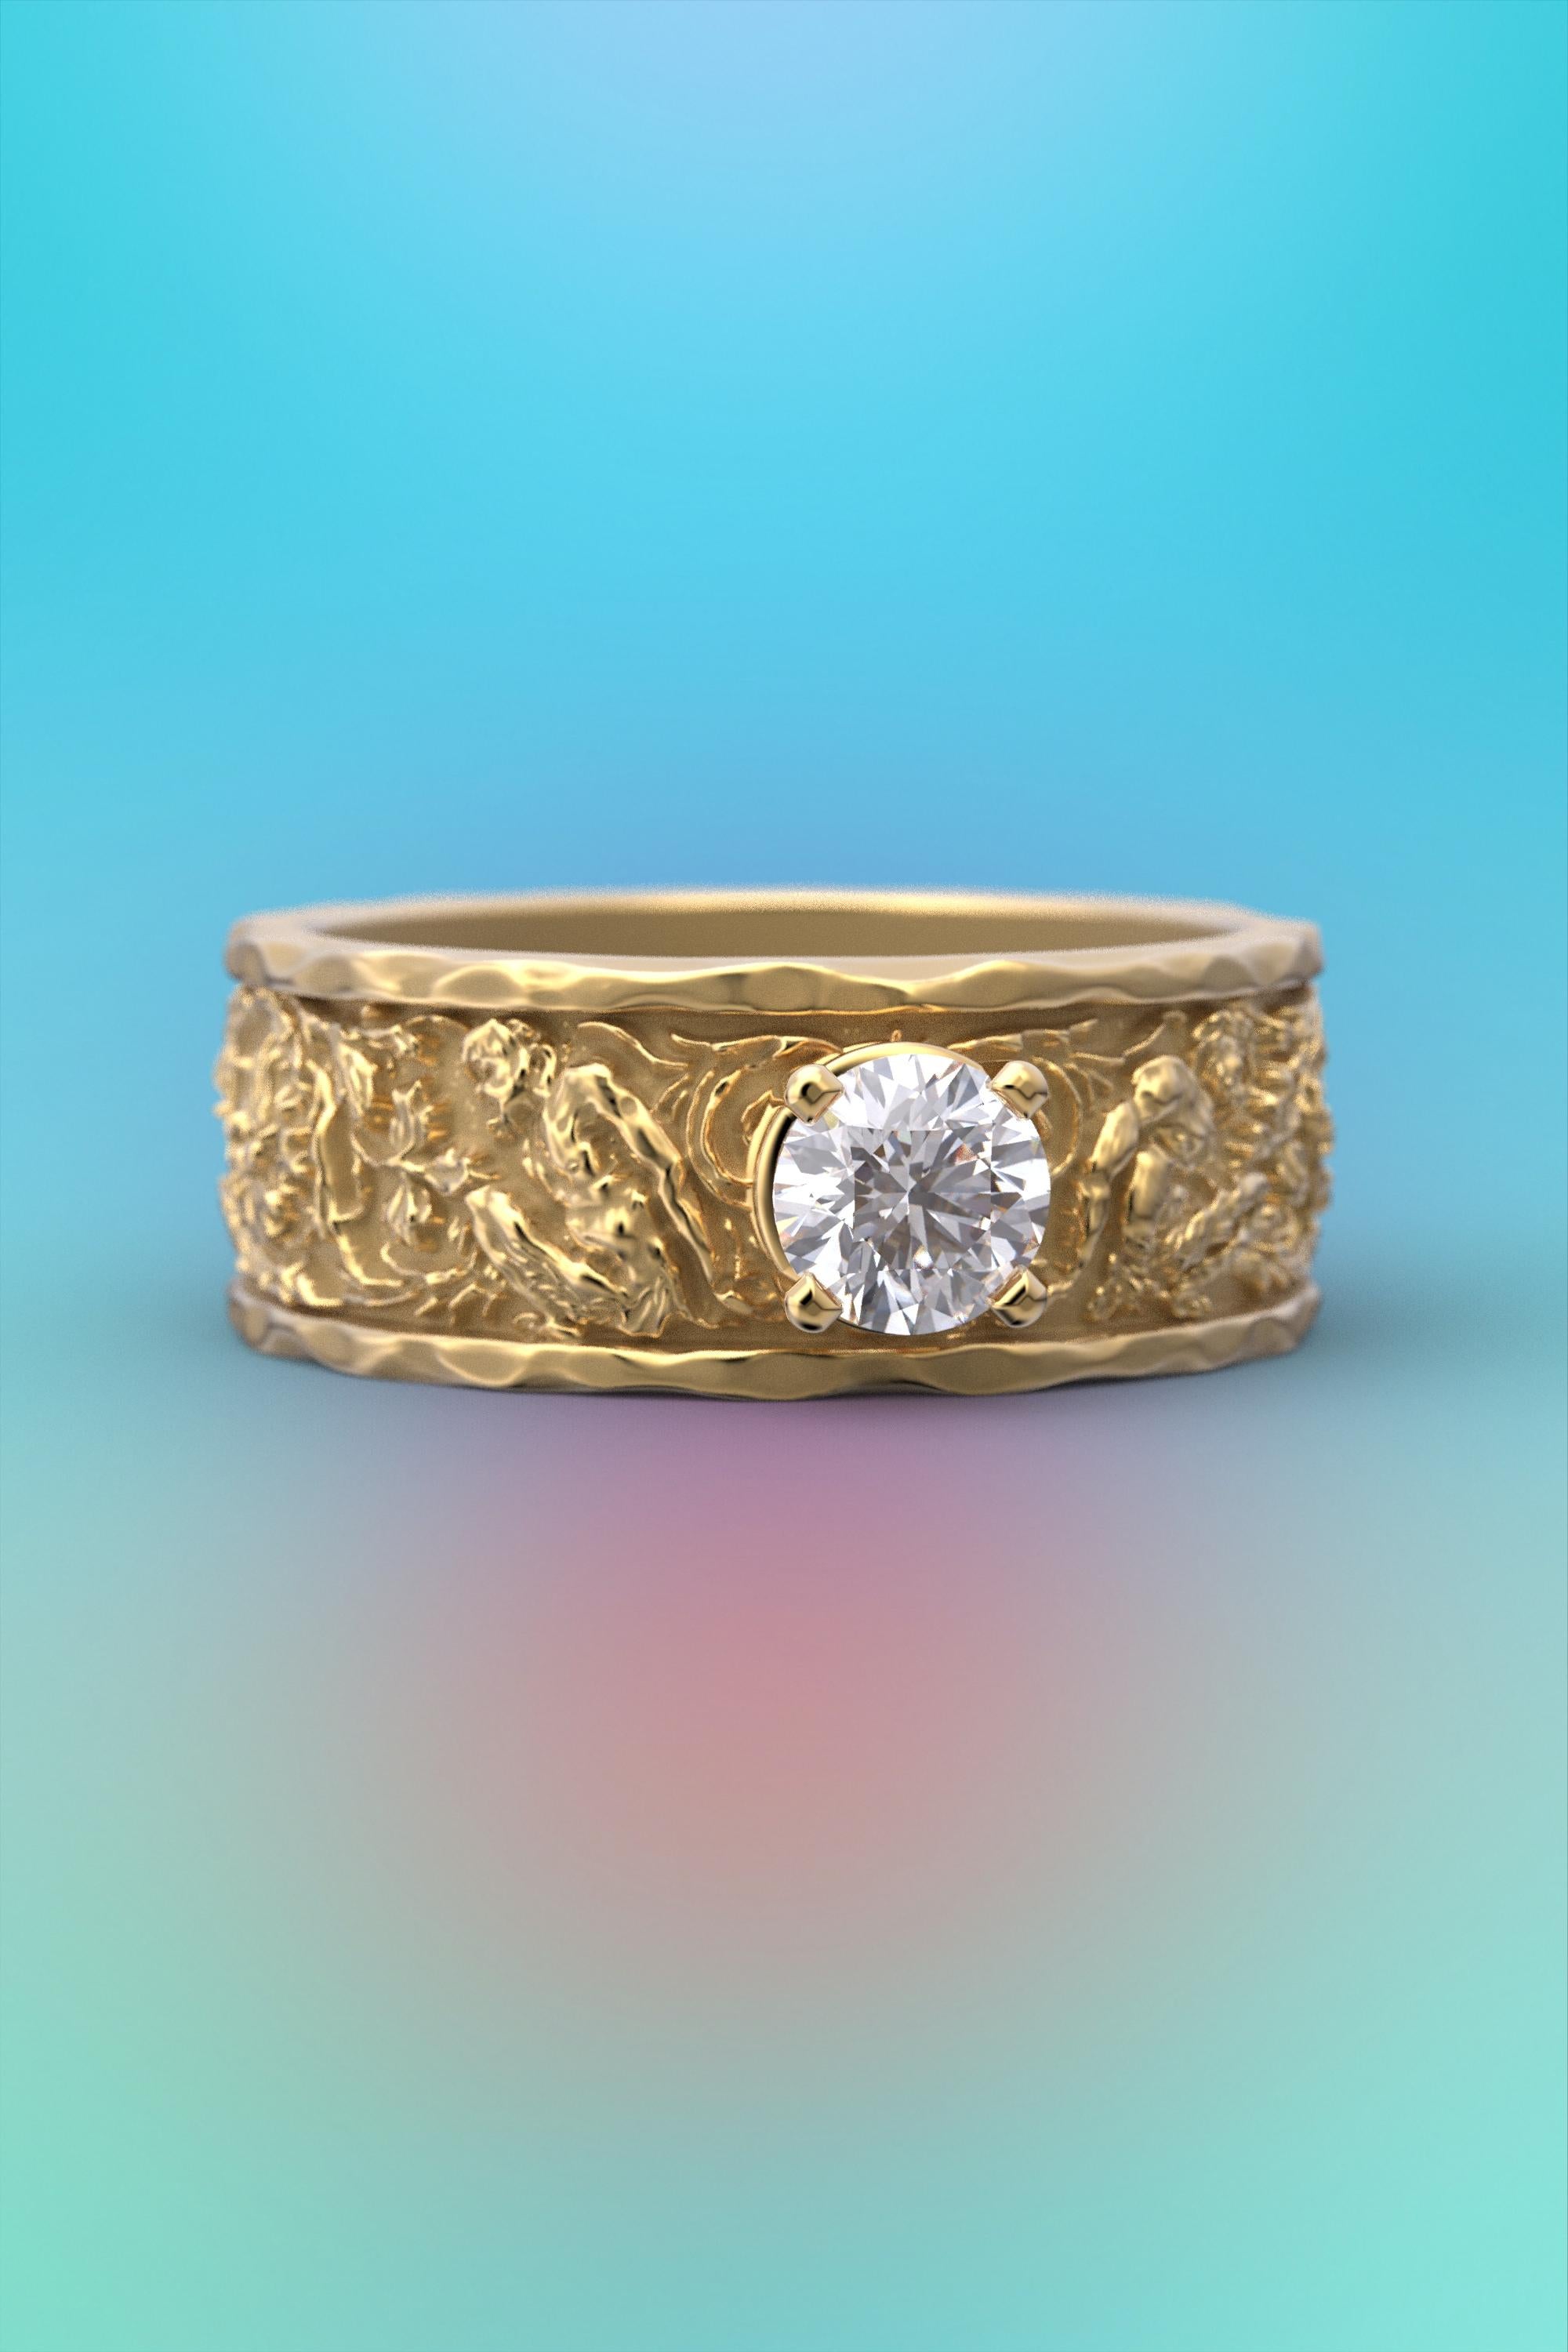 For Sale:  Men's Wedding Band: 18k Gold with Natural Half-Carat Diamond, made in Italy ring 3